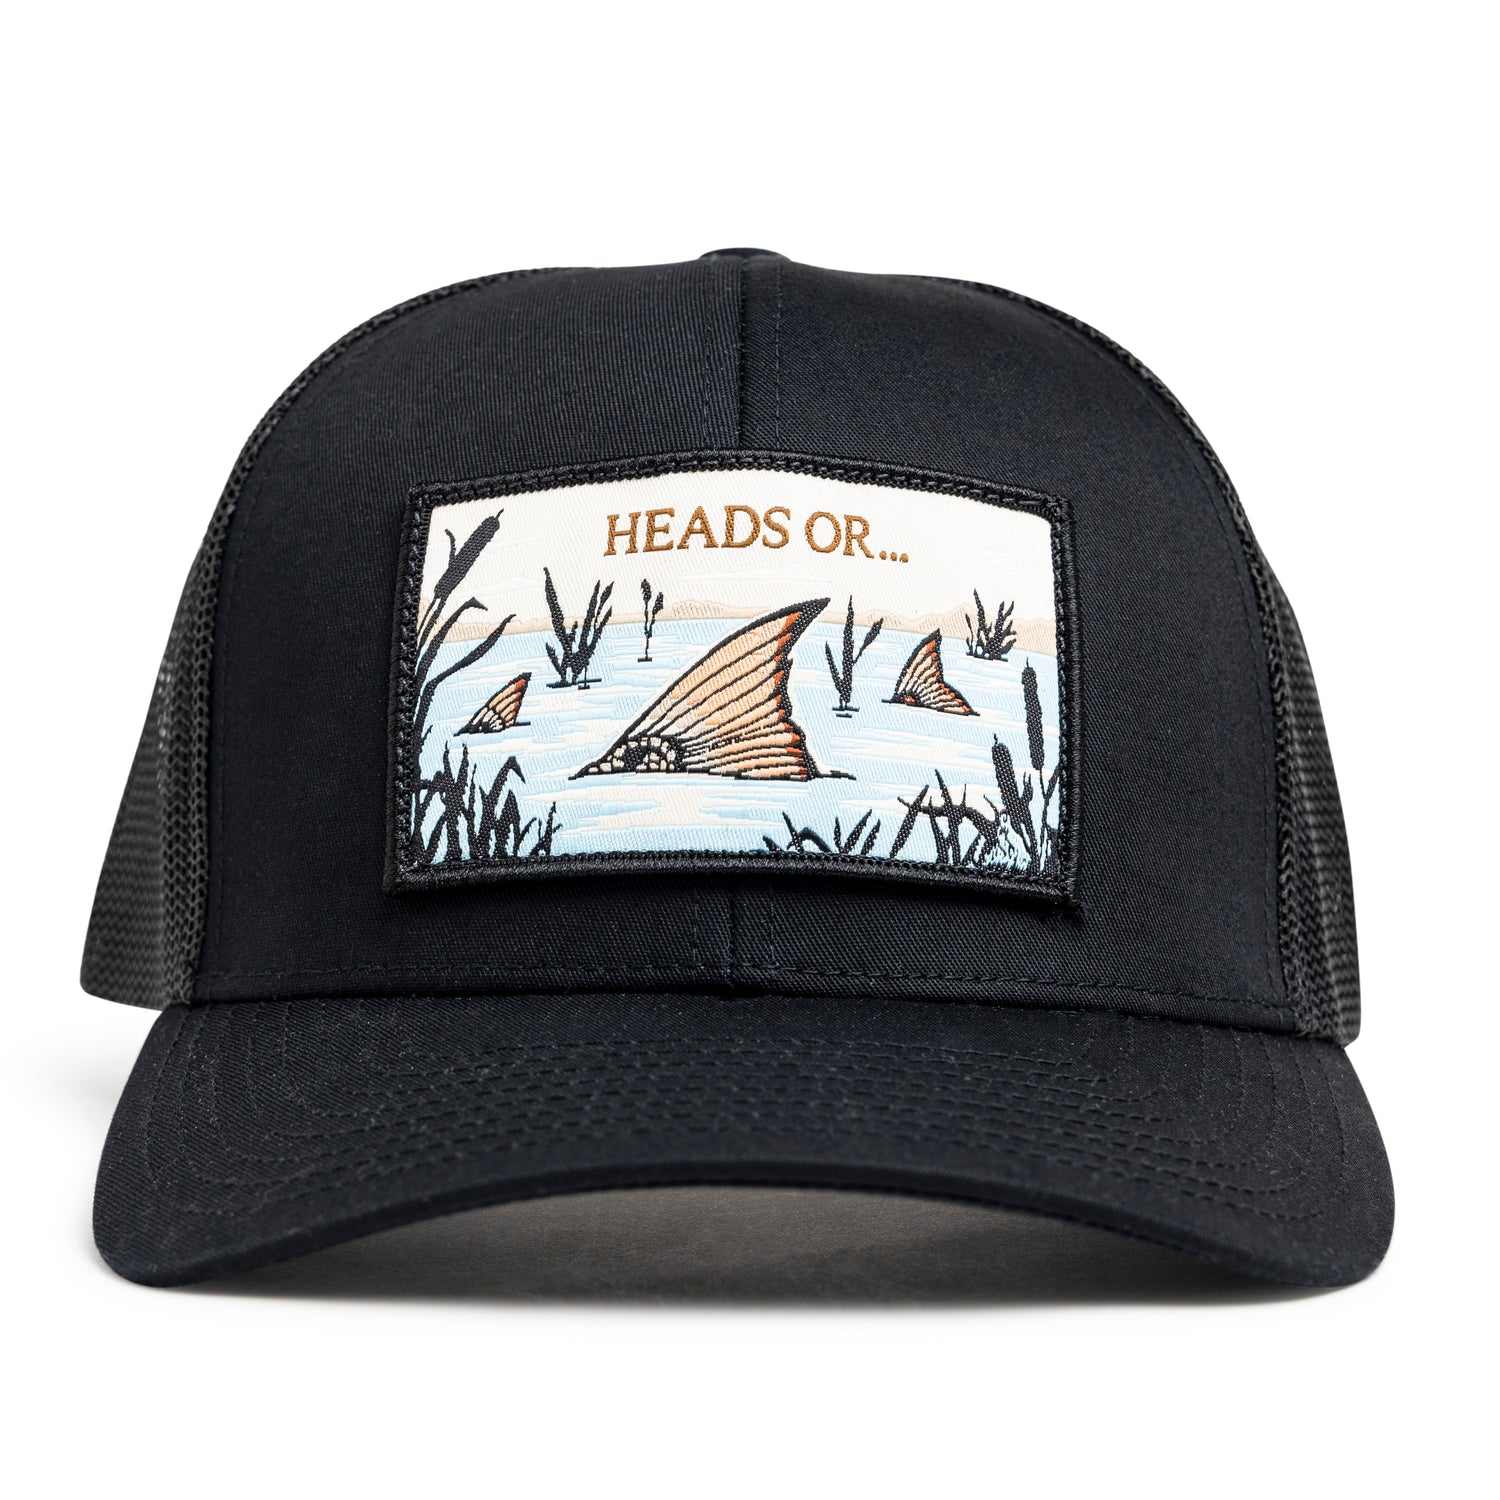 Heads or Tails Hat